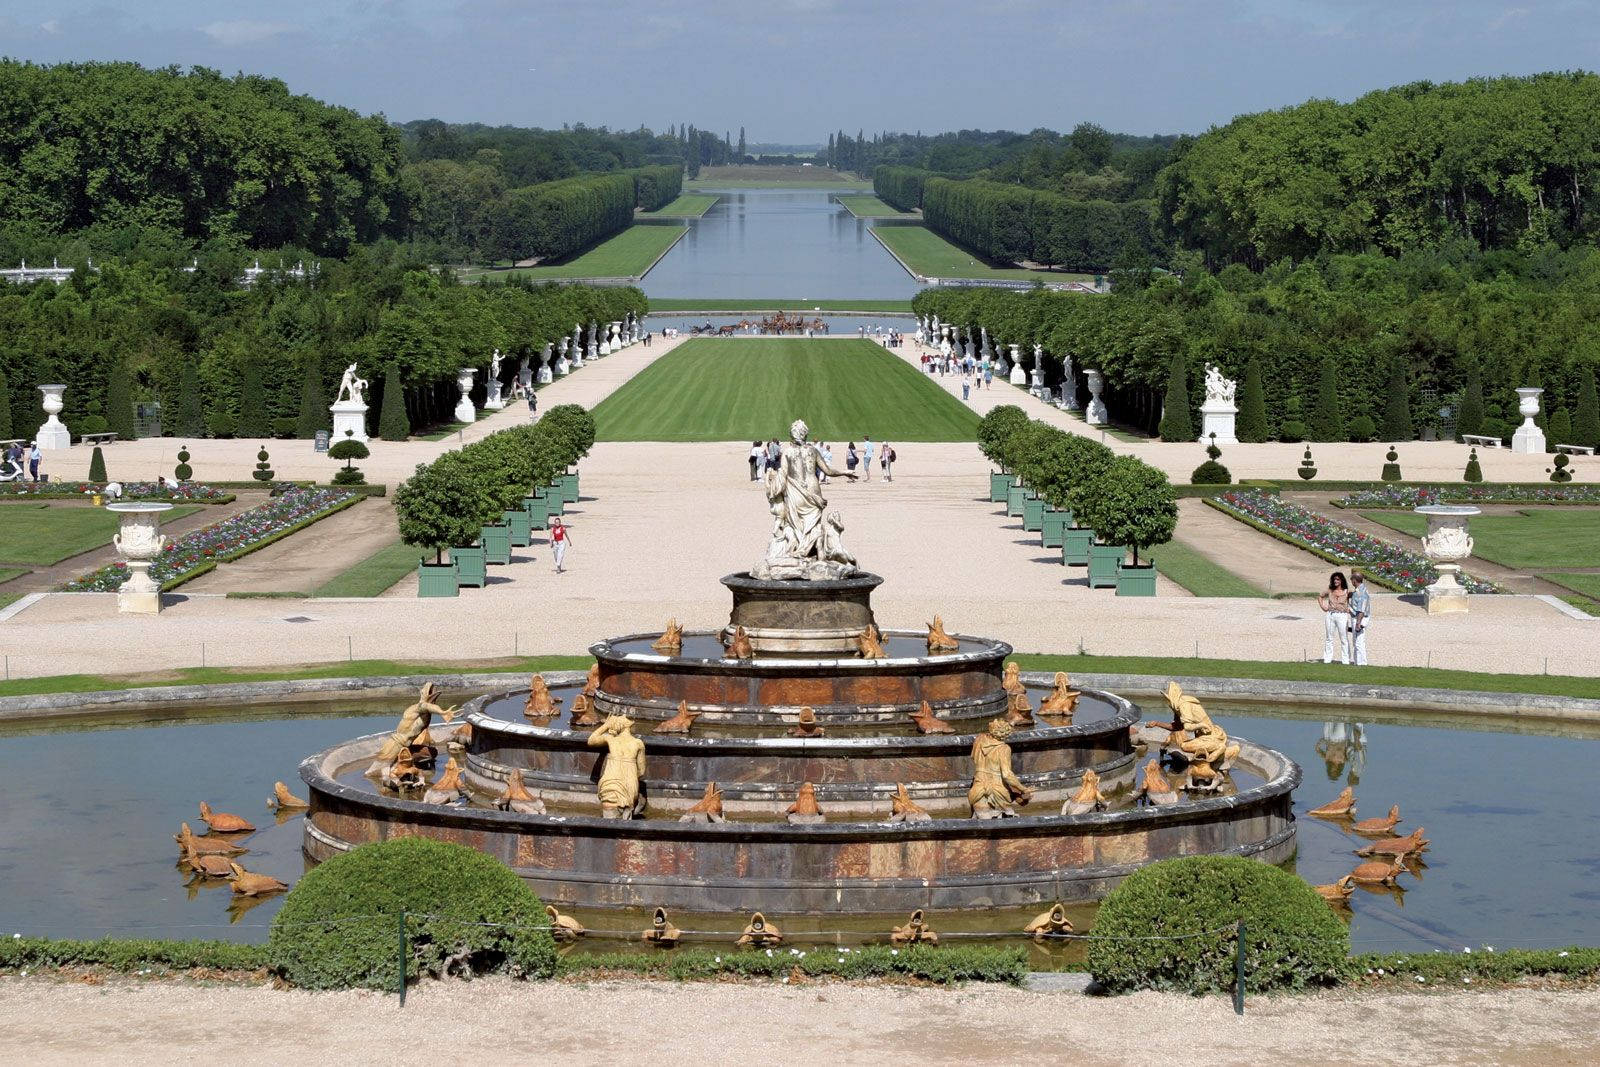 The Fountain In The Palace Of Versailles Gardens